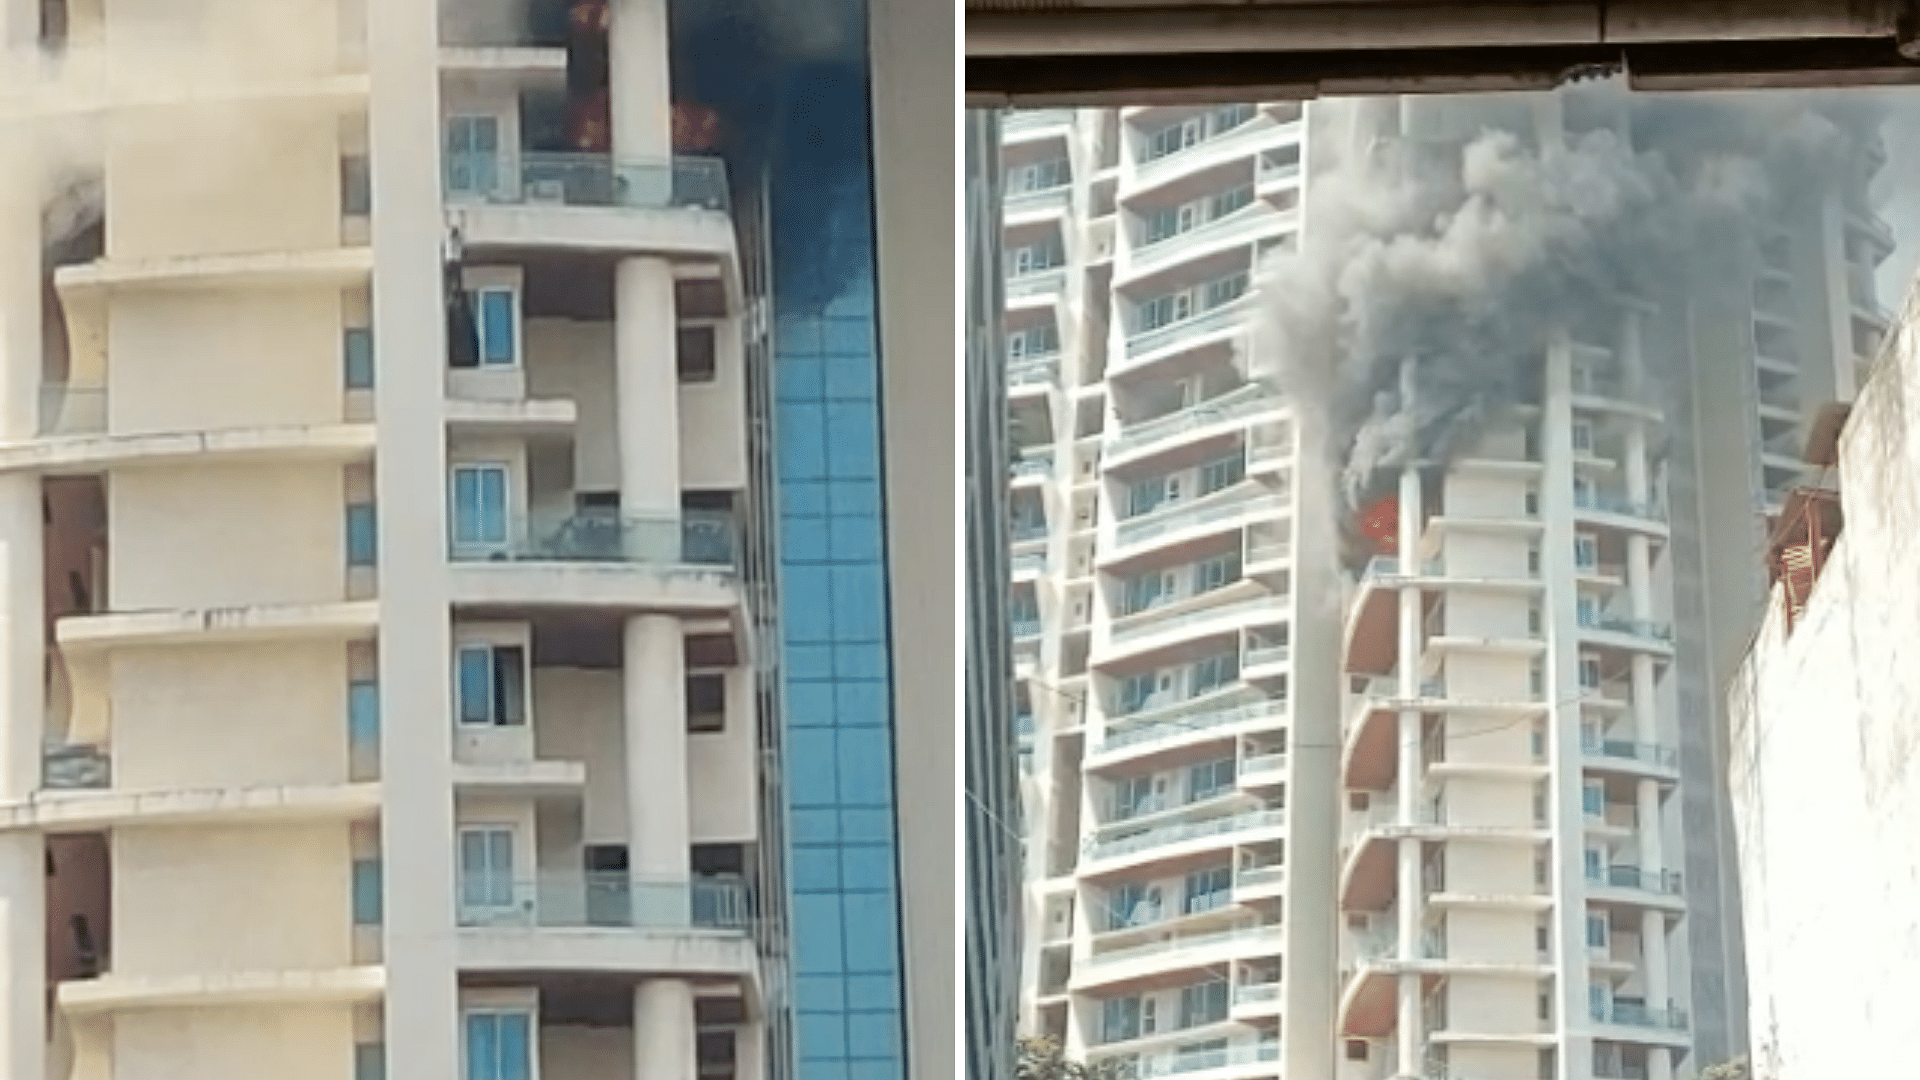 <div class="paragraphs"><p>A Level 3 fire broke out at on the 19th floor of a high-rise residential apartment building in Mumbai's Lower Parel area on Friday, 22 October.</p></div>